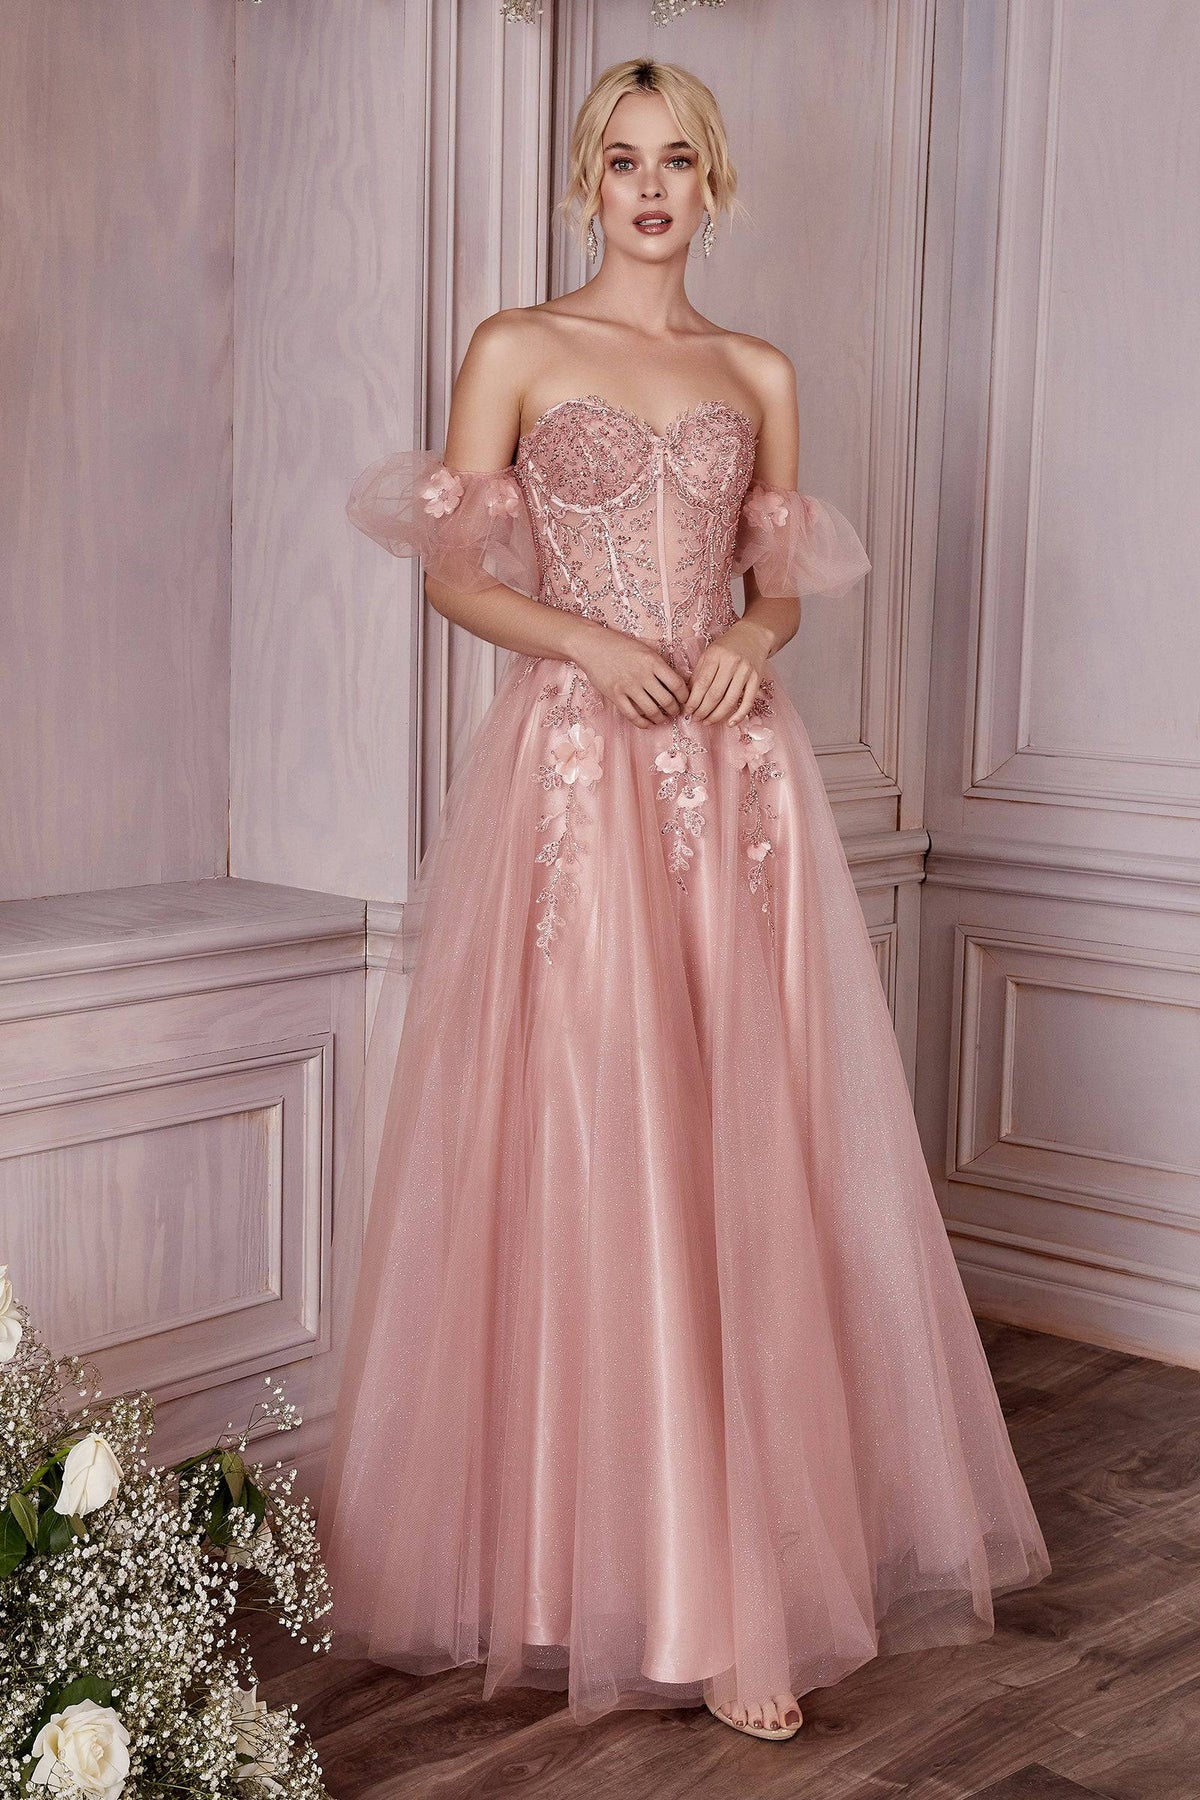 Gorgeous Corset Style Ball Gown With Floral & Rhinestone Embroidery #CDCD0191 | Norma Reed - NORMA REED